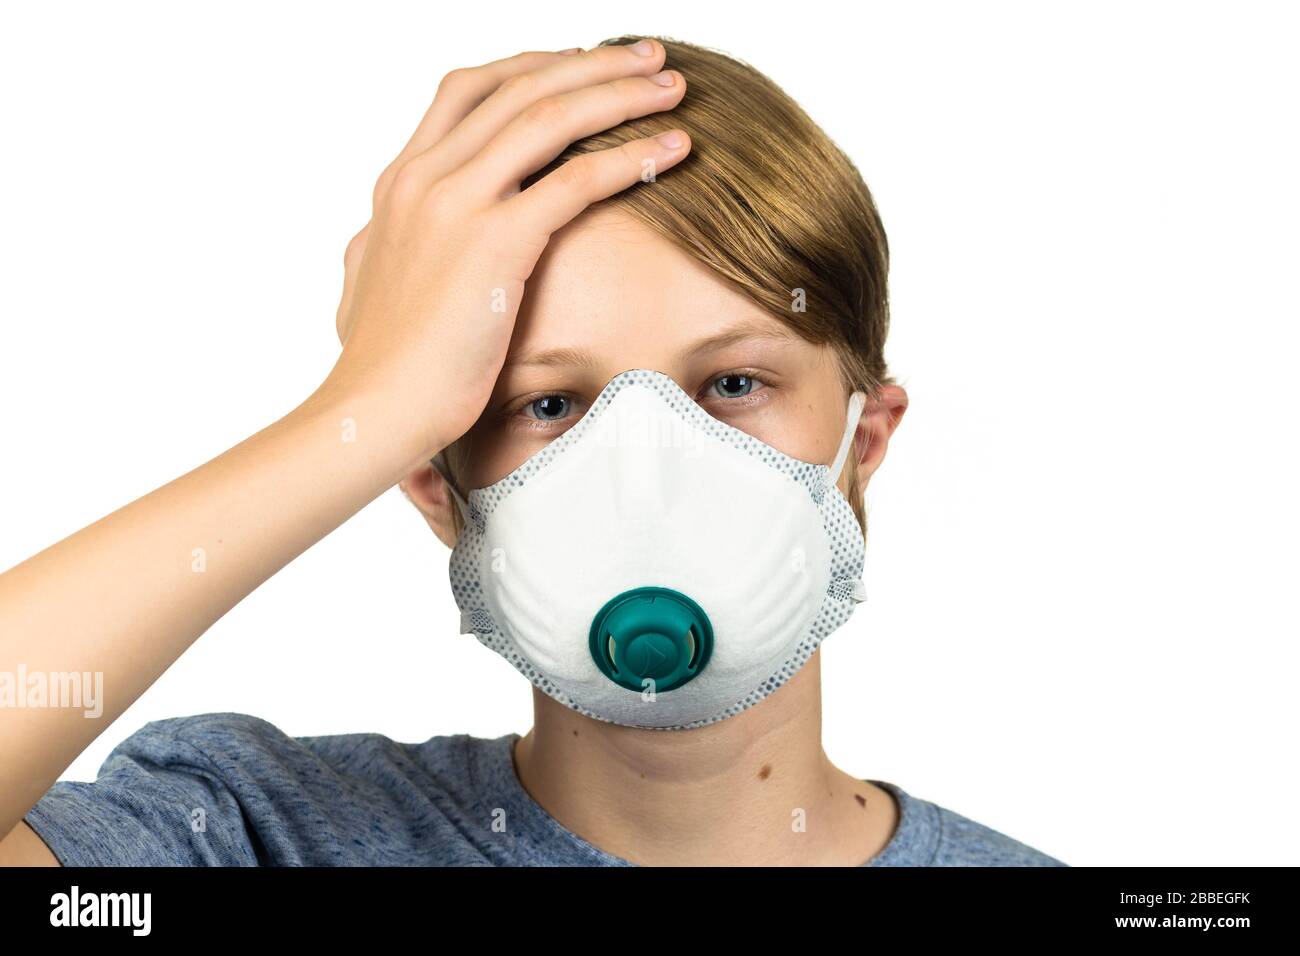 Young teenage boy with headache wearing protective mask. Isolated on white. Stock Photo